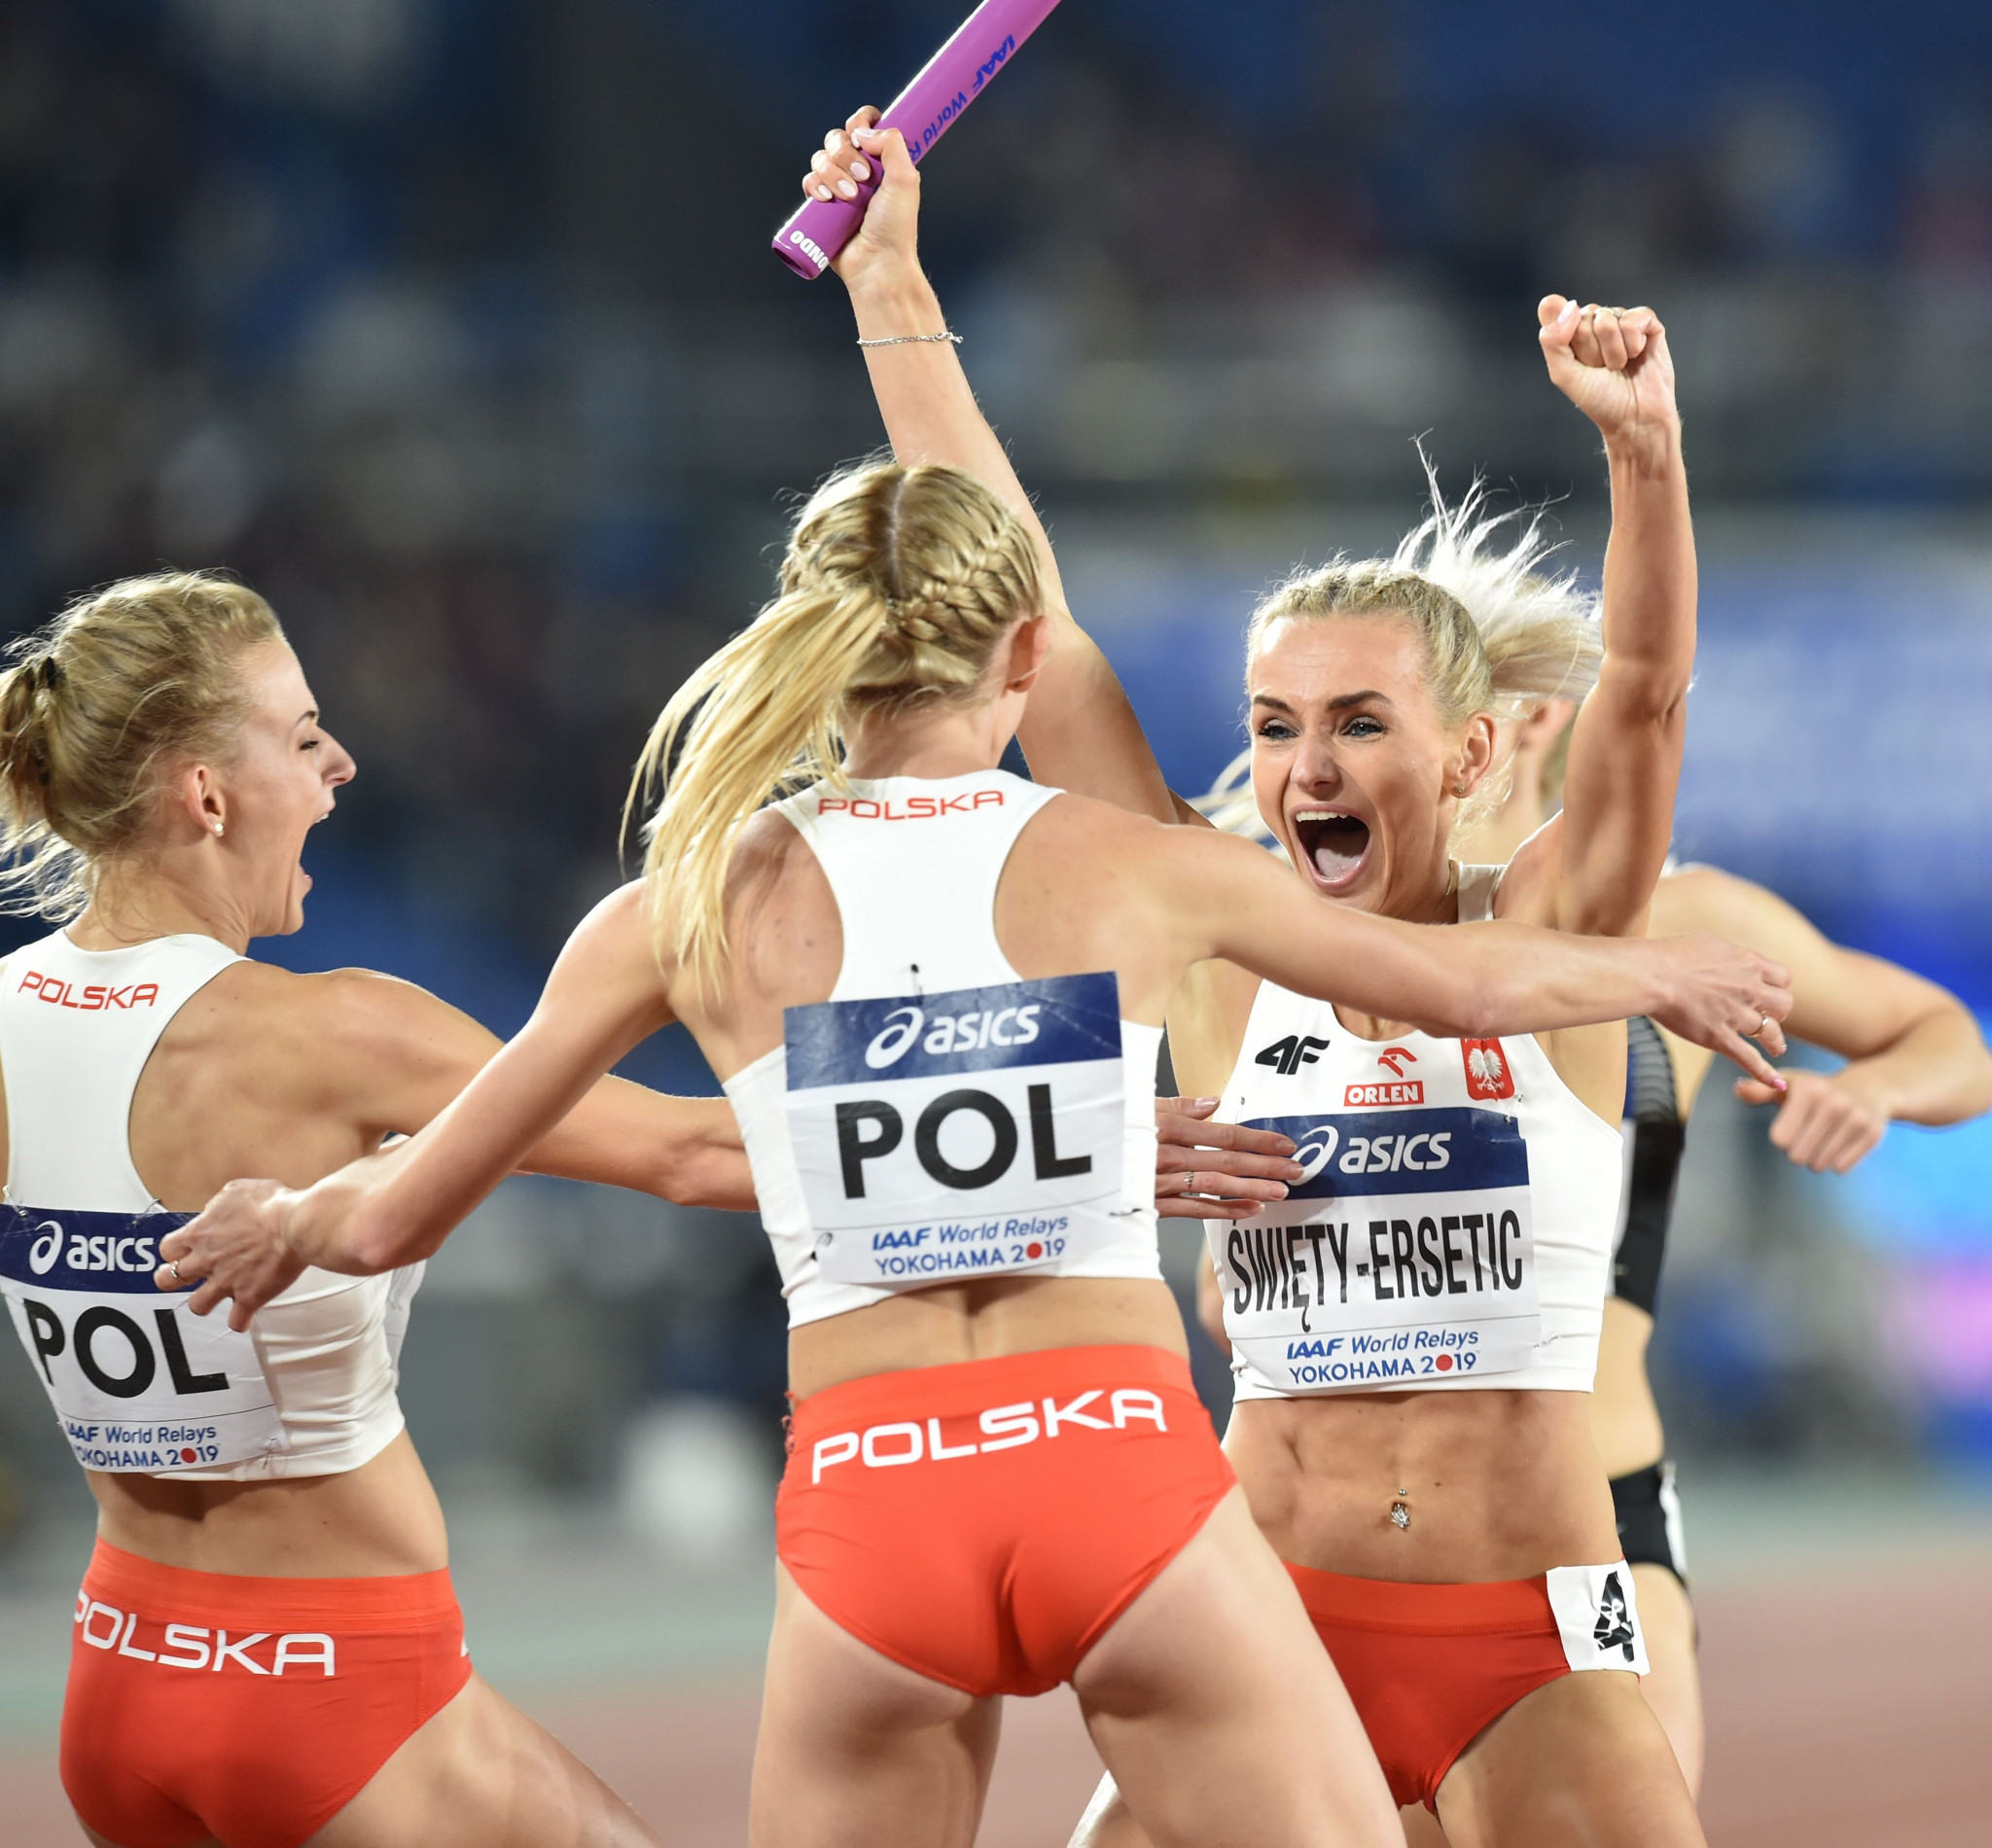 Poland and Germany set to go head to head for European Athletics Team Championships Super League as nations aim to avoid five relegation spots